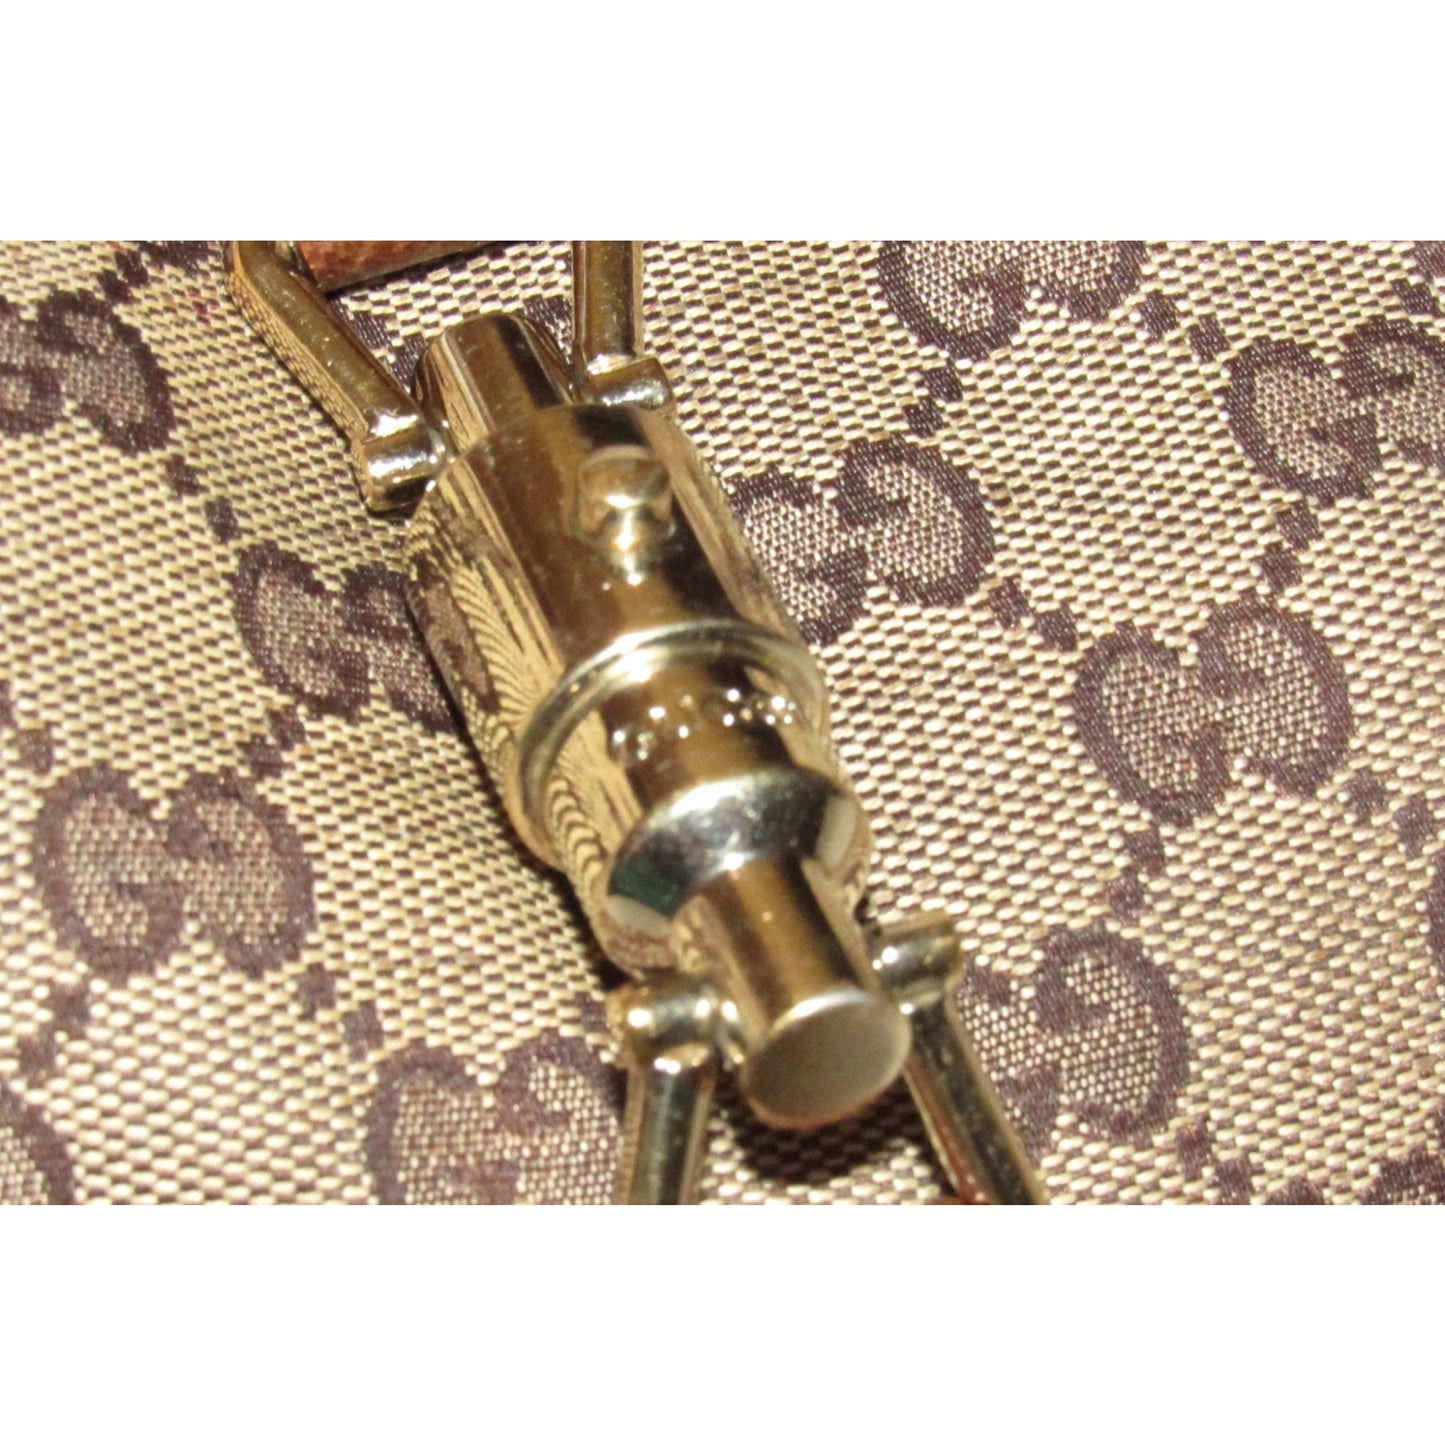 Vintage Gucci, brown Guccissima print fabric and leather, Jackie style shoulder bag with a gold piston clasp!